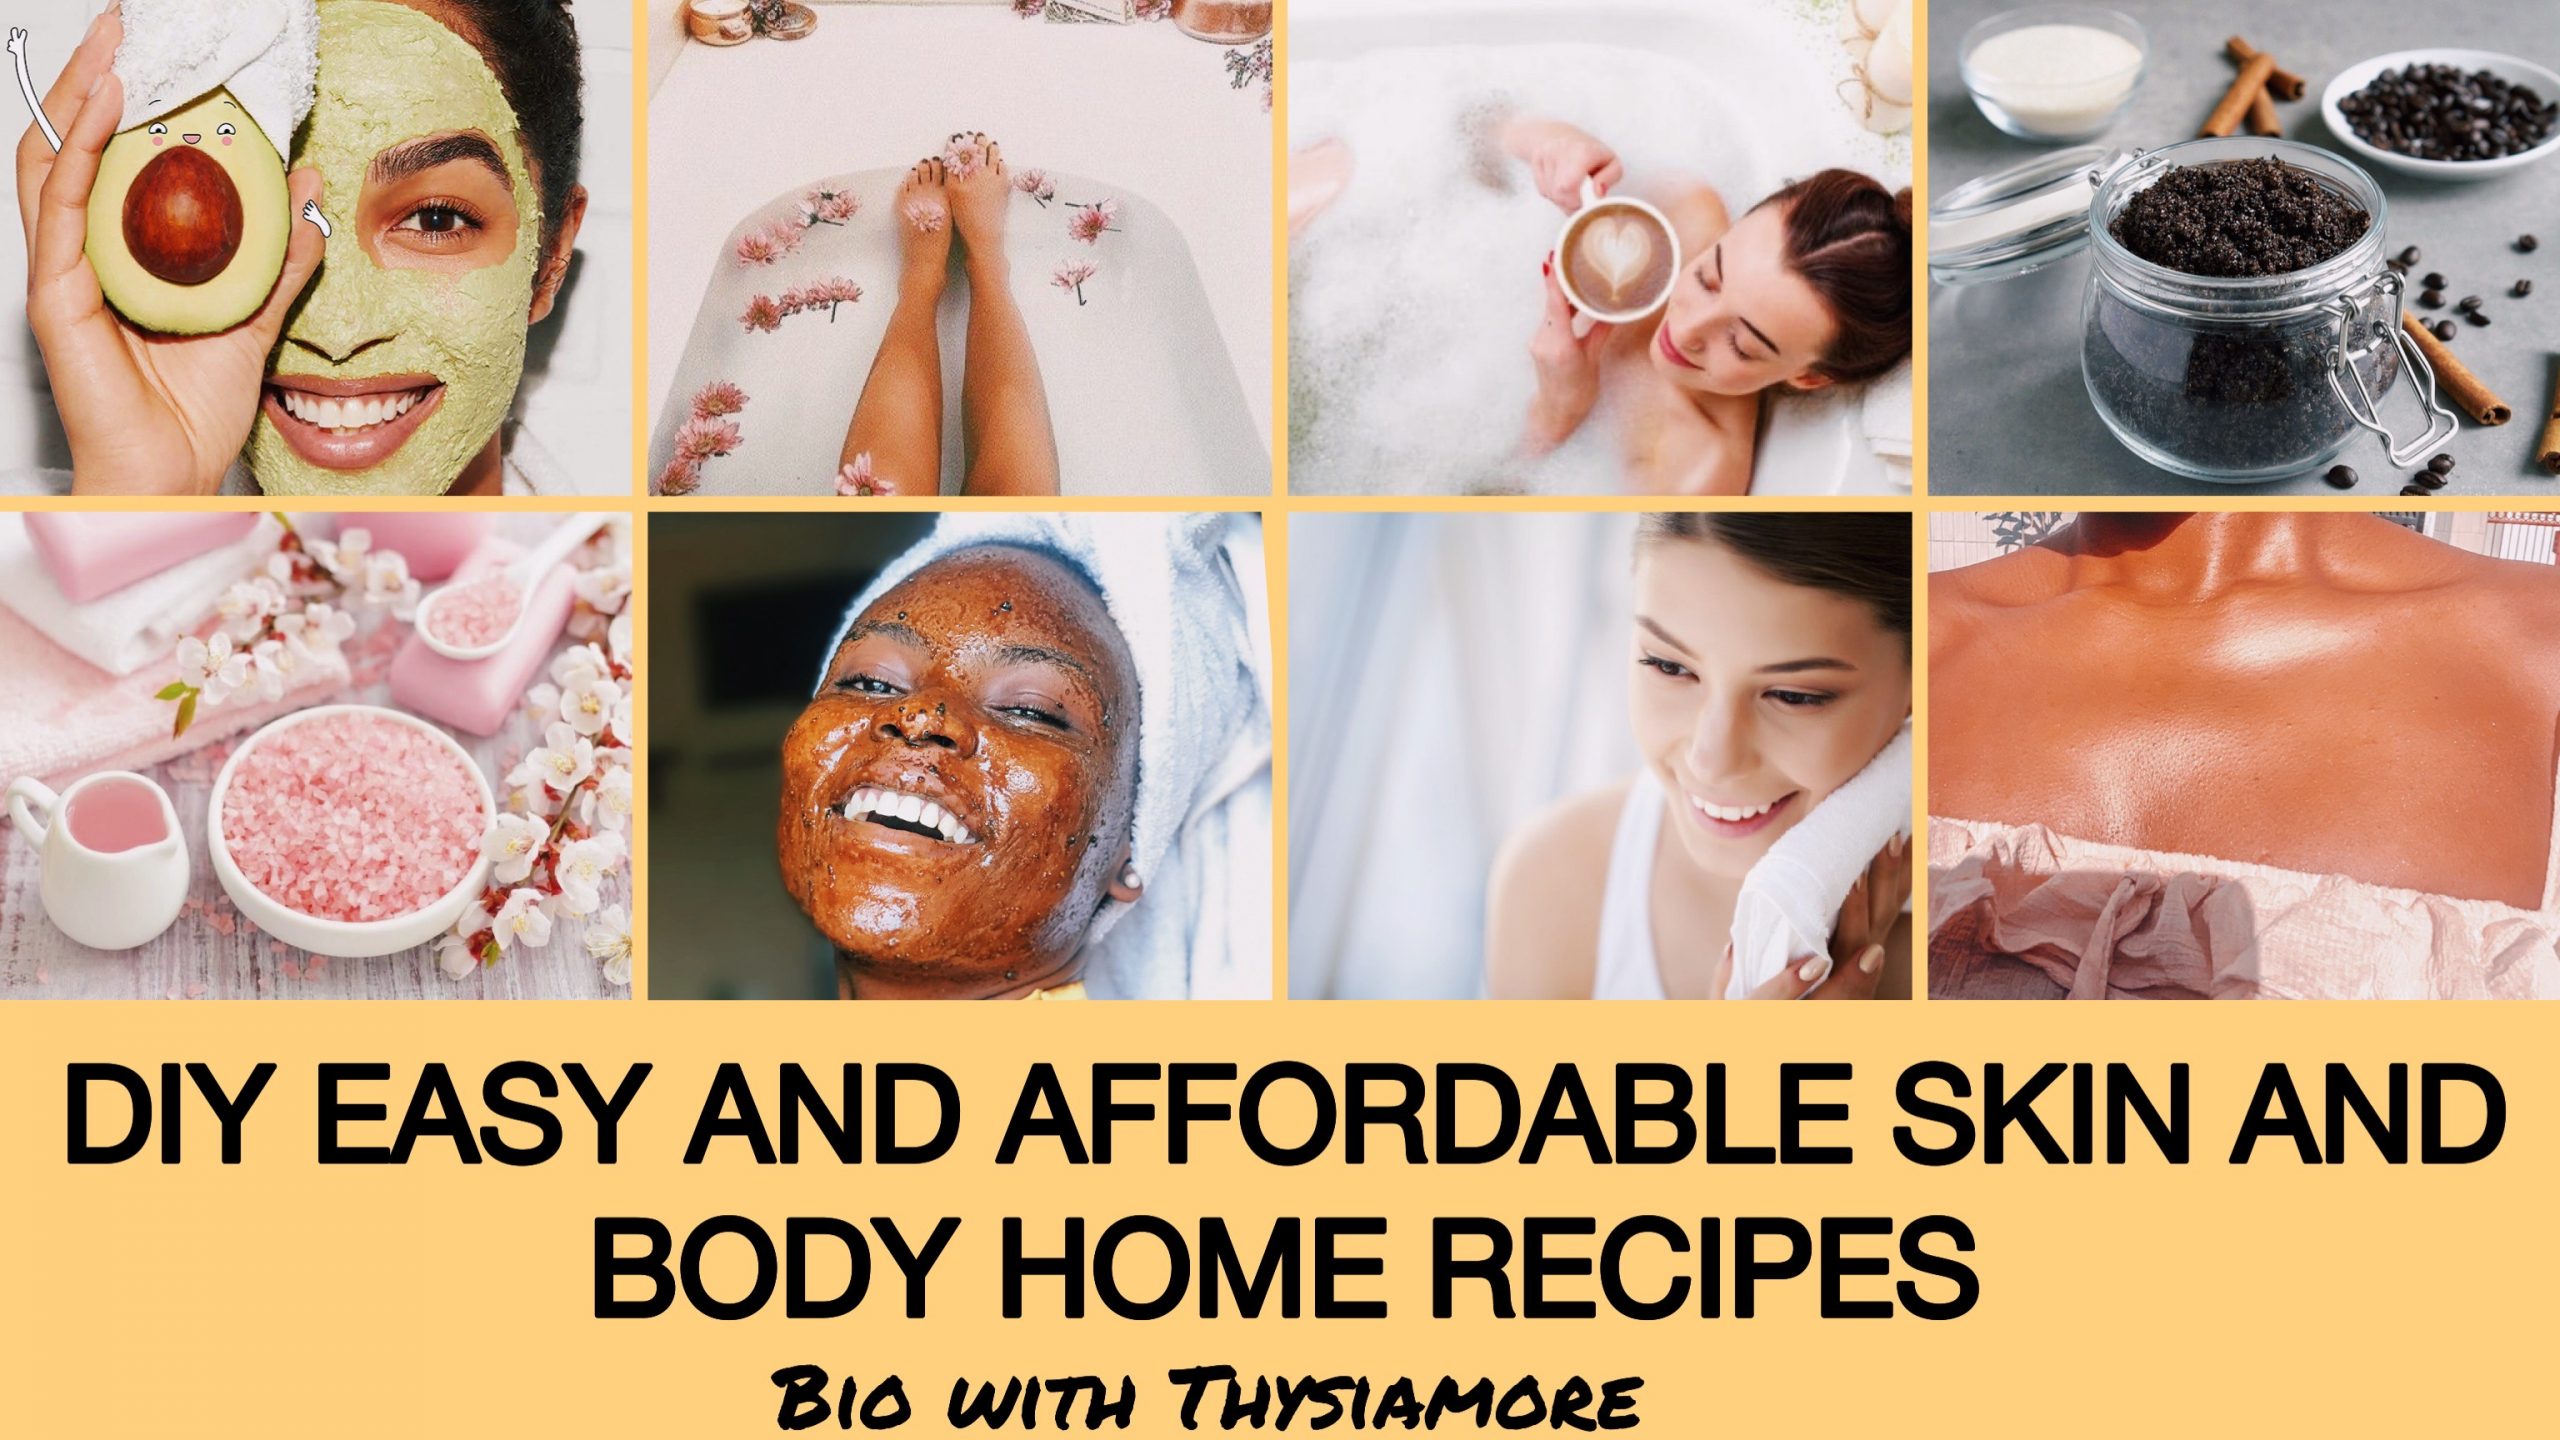 DIY EASY AND AFFORDABLE SKIN AND BODY HOME RECIPES